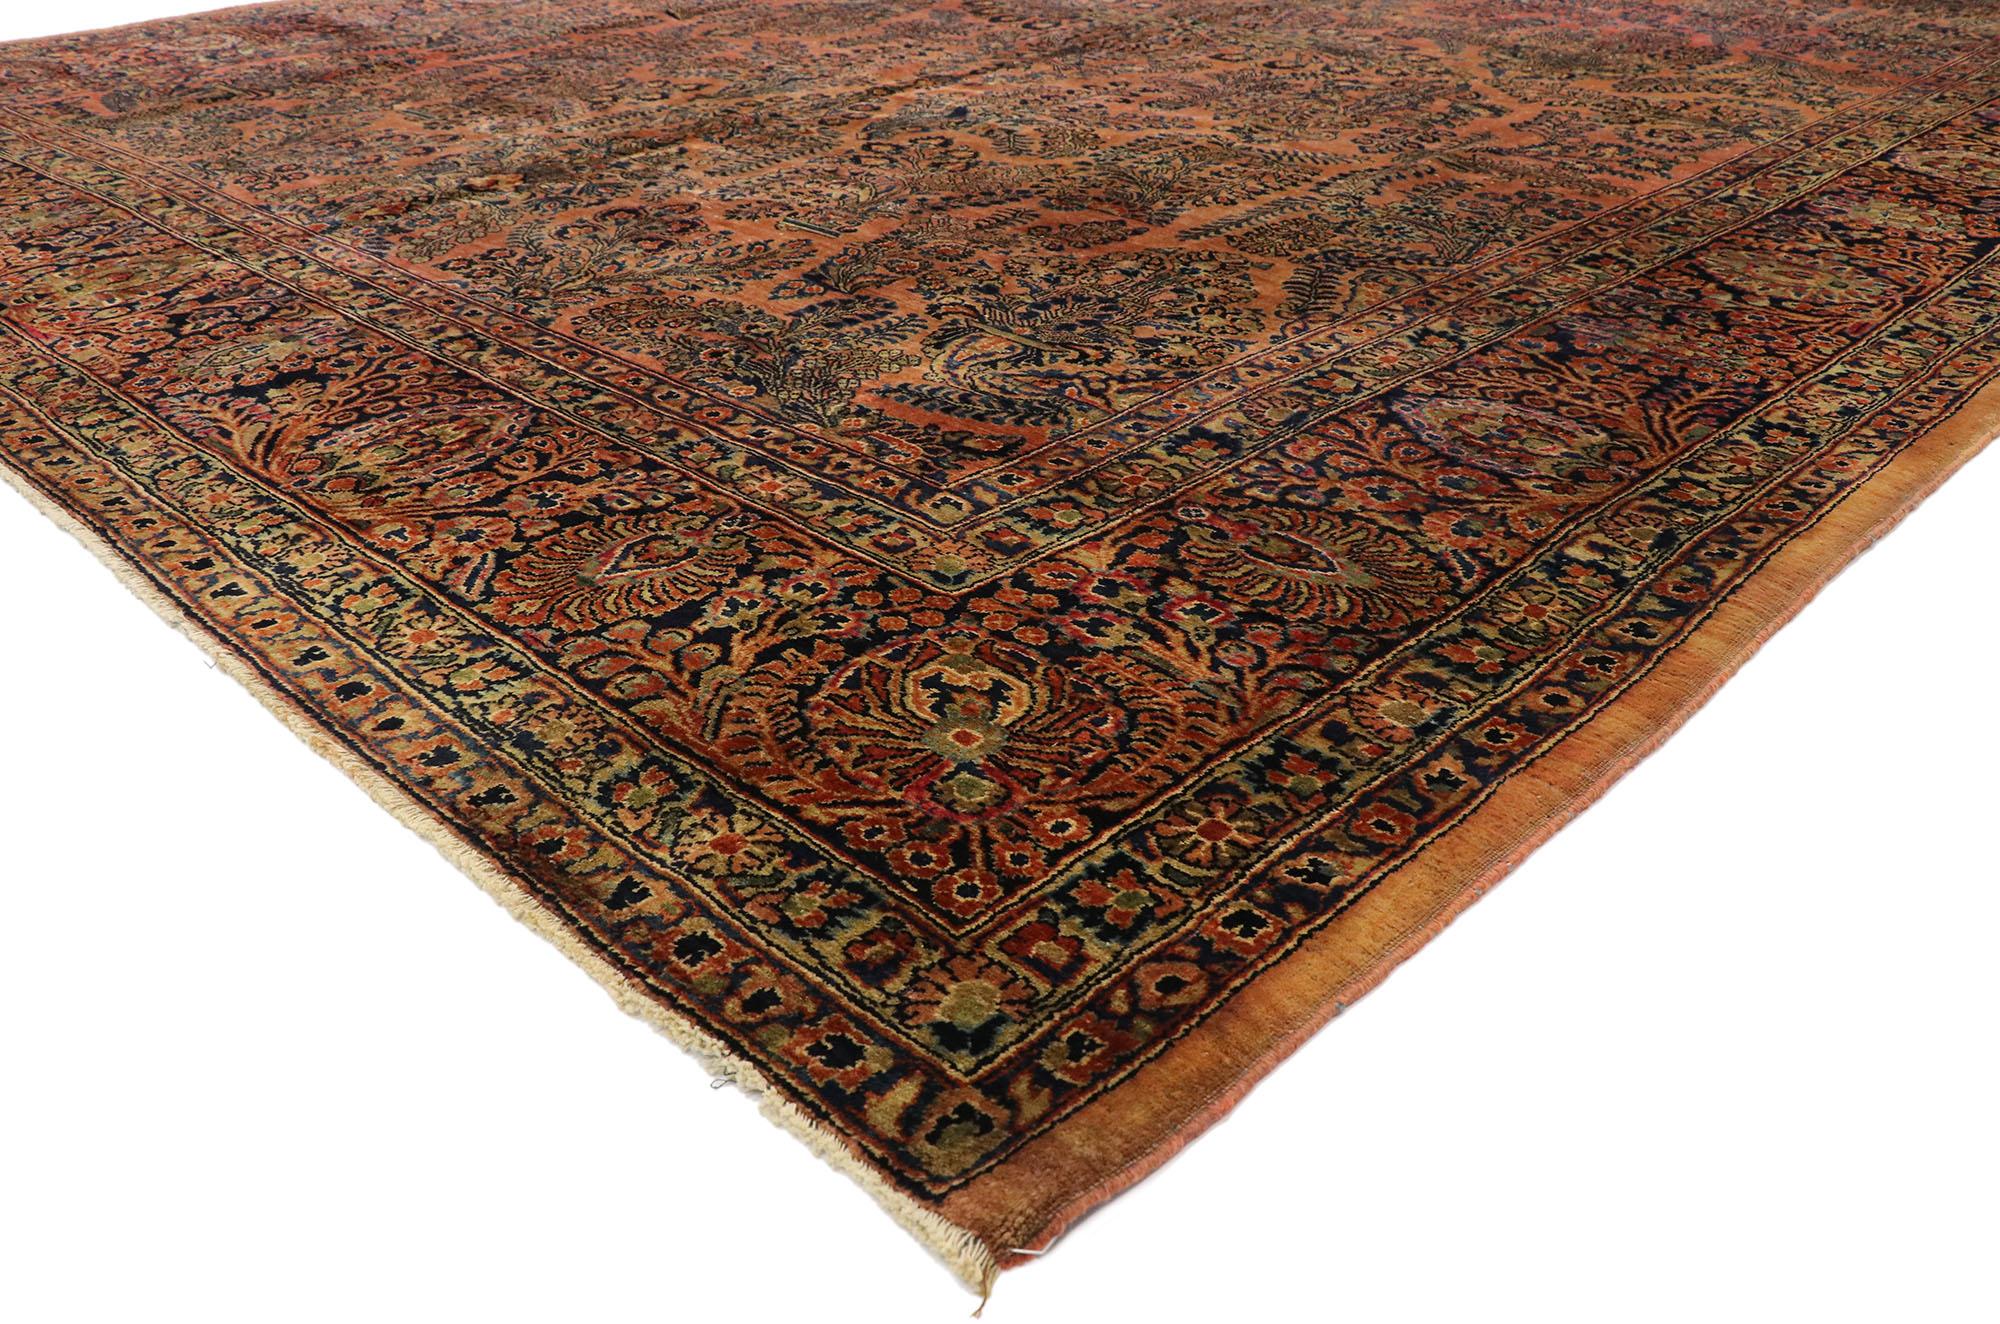 74952, antique Persian Sarouk rug with Rustic American Traditional style. With timeless appeal and time-softened colors, this hand knotted wool antique Persian Sarouk rug can beautifully blend modern, traditional, rustic, and contemporary interiors.